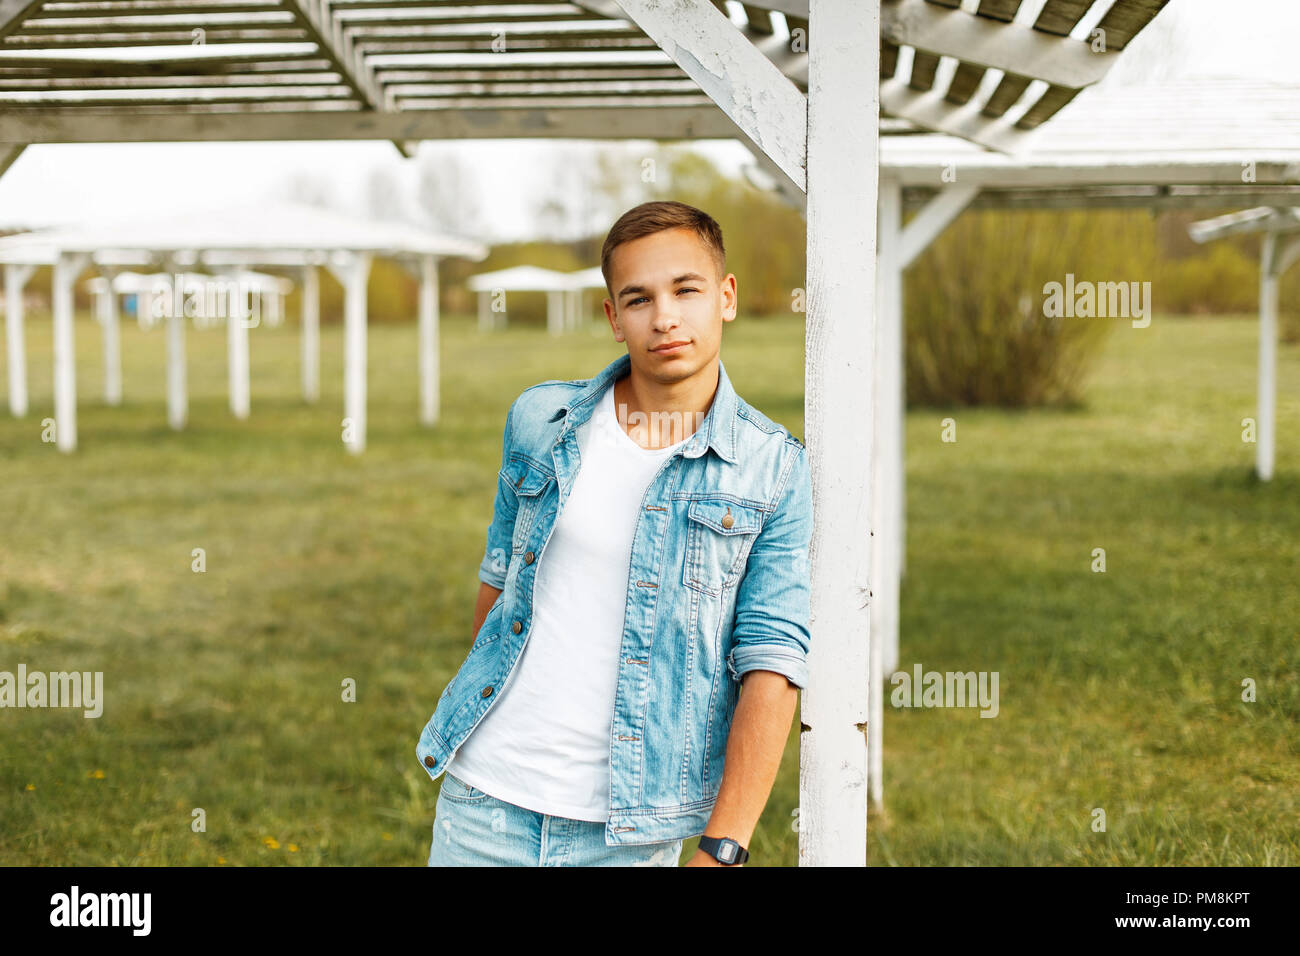 Handsome young man in a denim jacket and white shirt outdoors Stock Photo